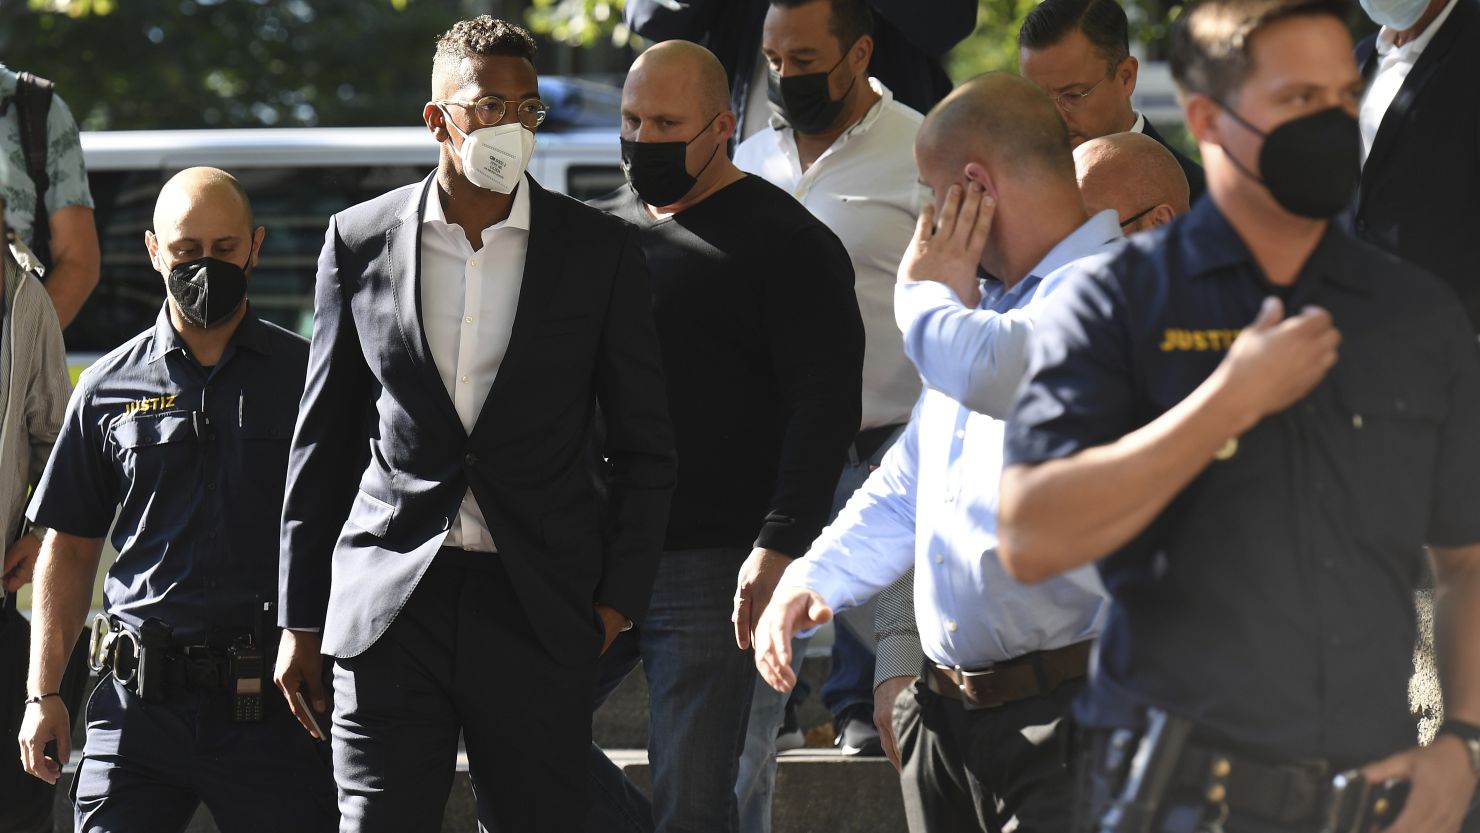 German footballer Jerome Boateng was found guilty of premeditated bodily harm on his former partner, a spokesperson for a court in Munich said on Thursday.